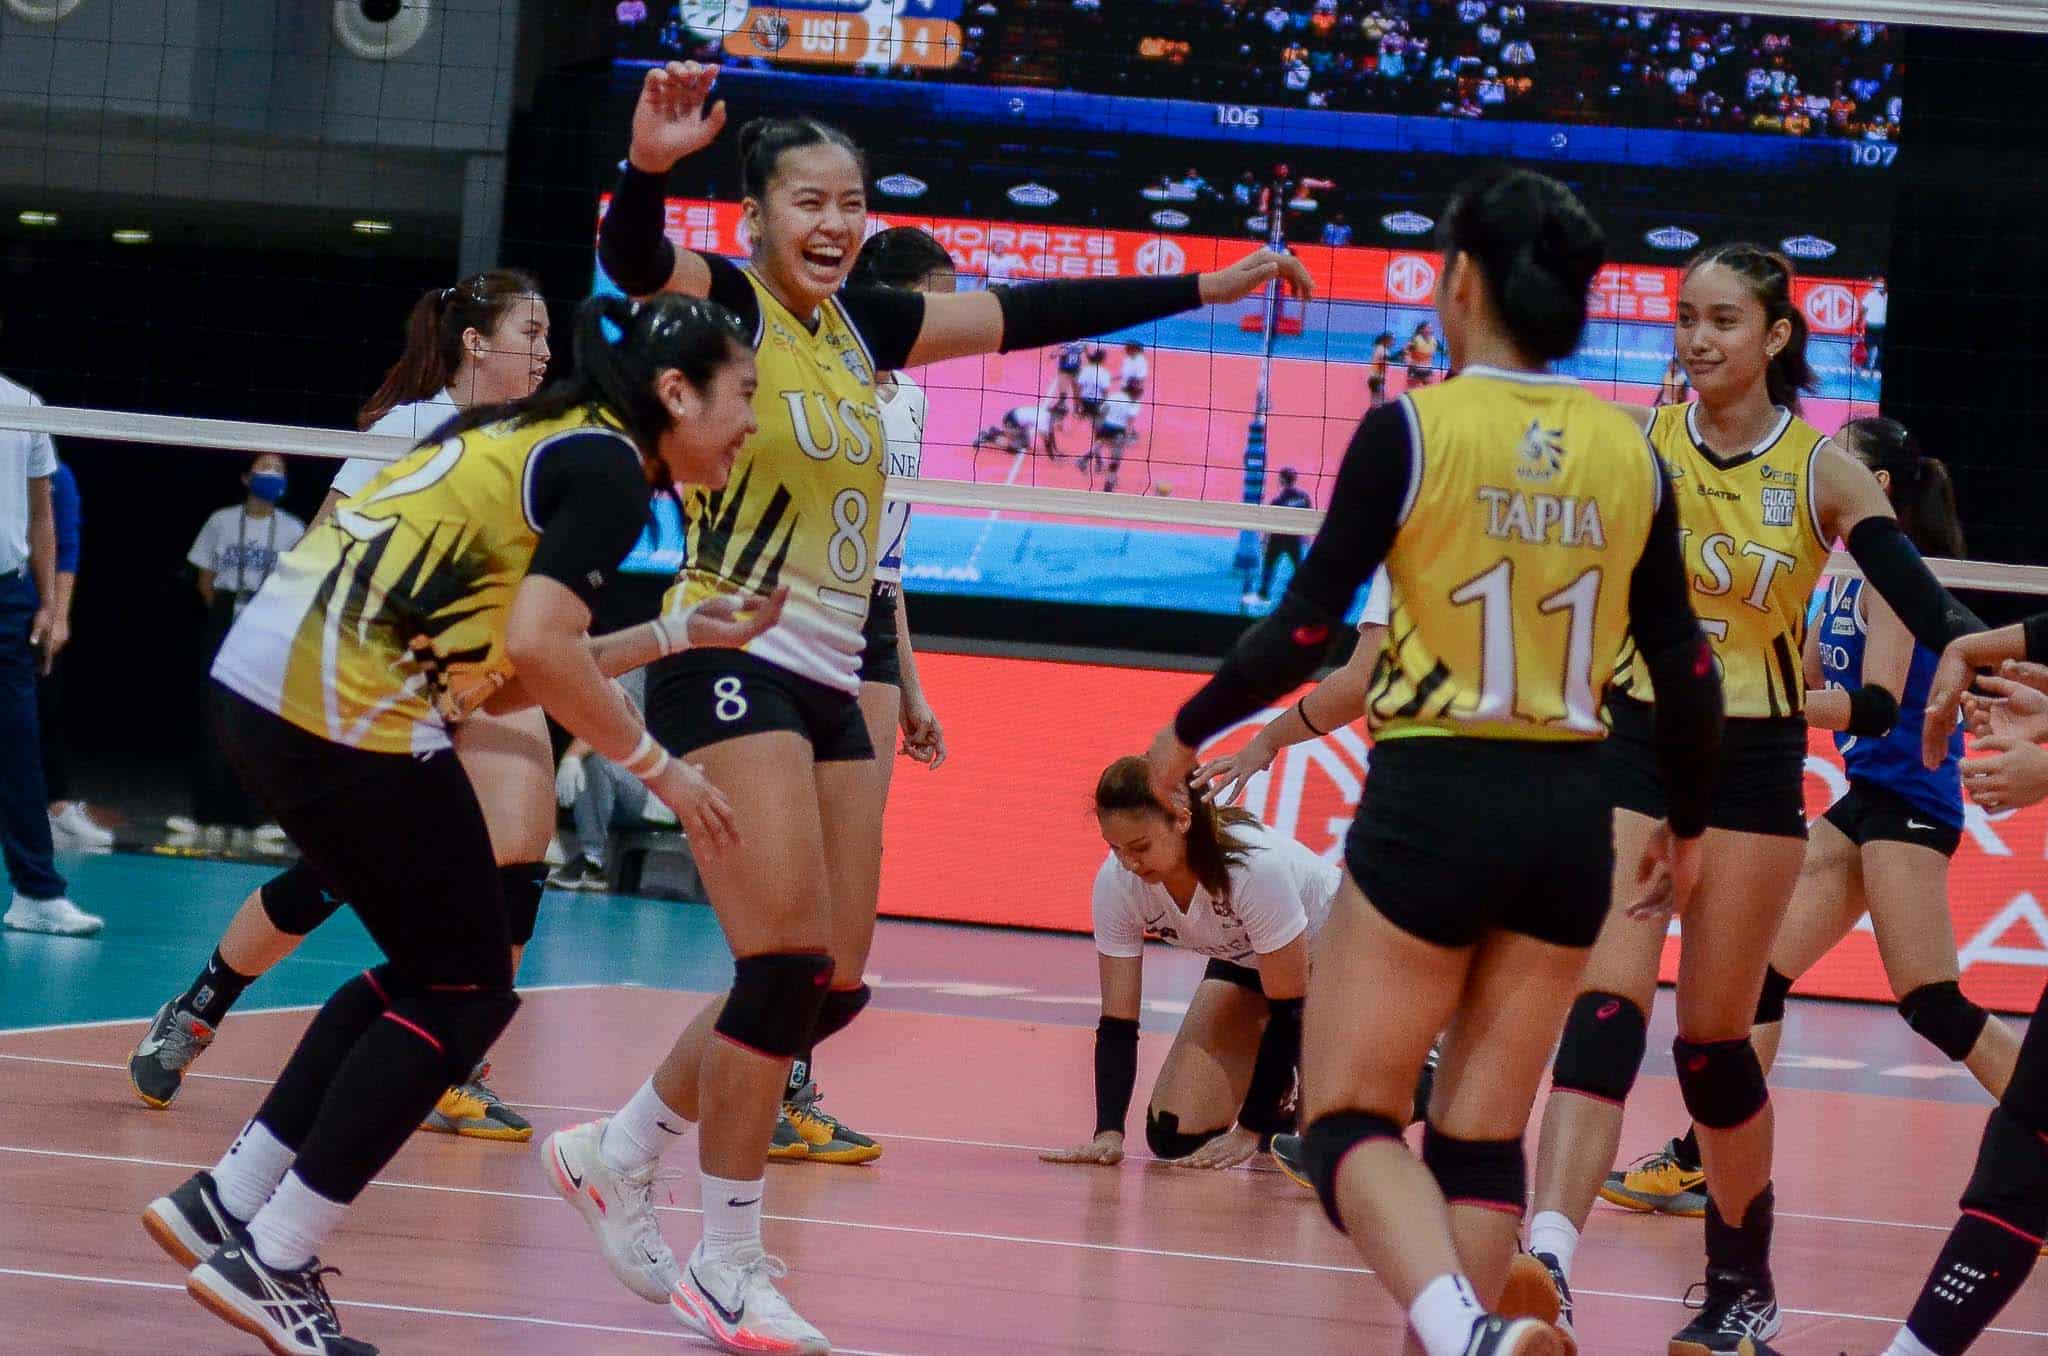 UST celebrates win against Ateneo in UAAP women's volleyball.